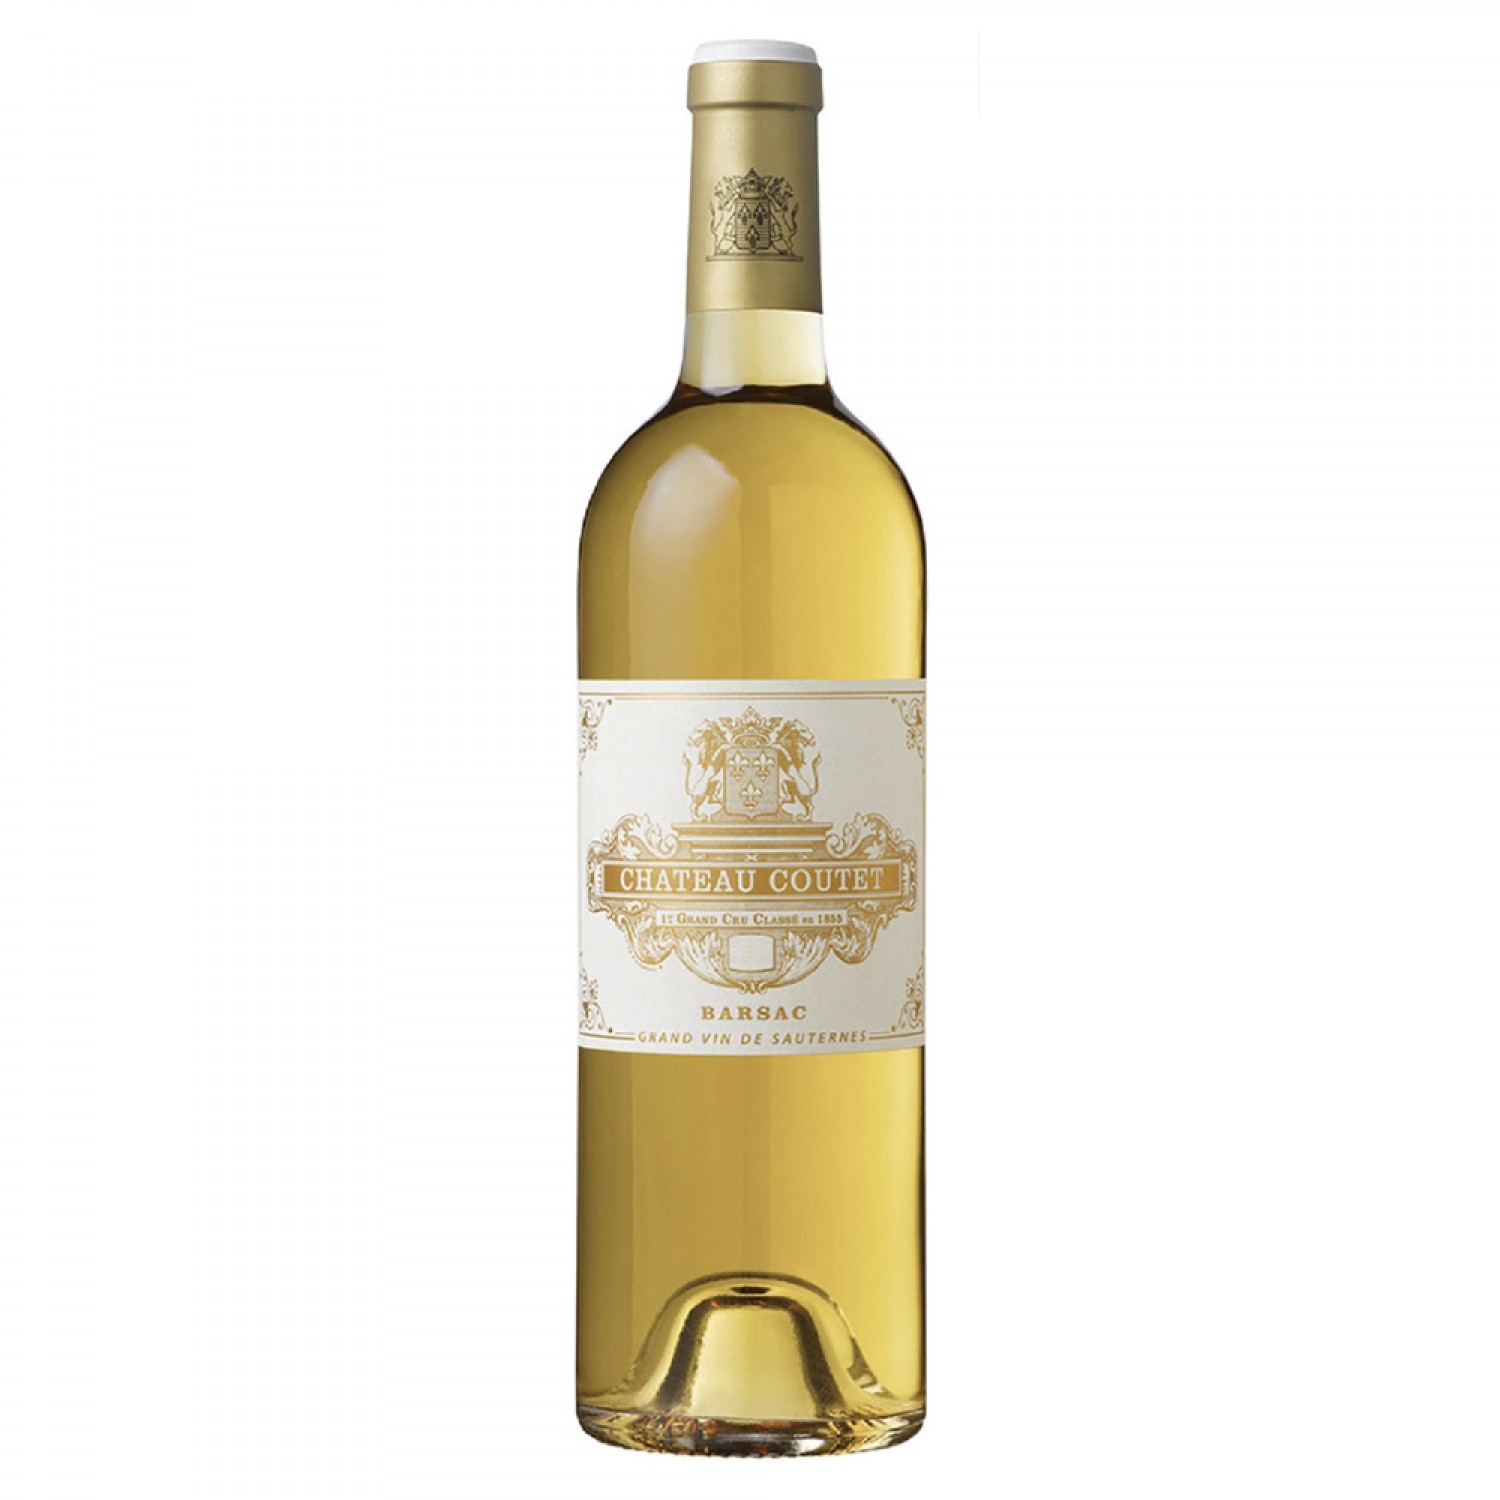 Chateau Coutet 2014, Barsac 750ml